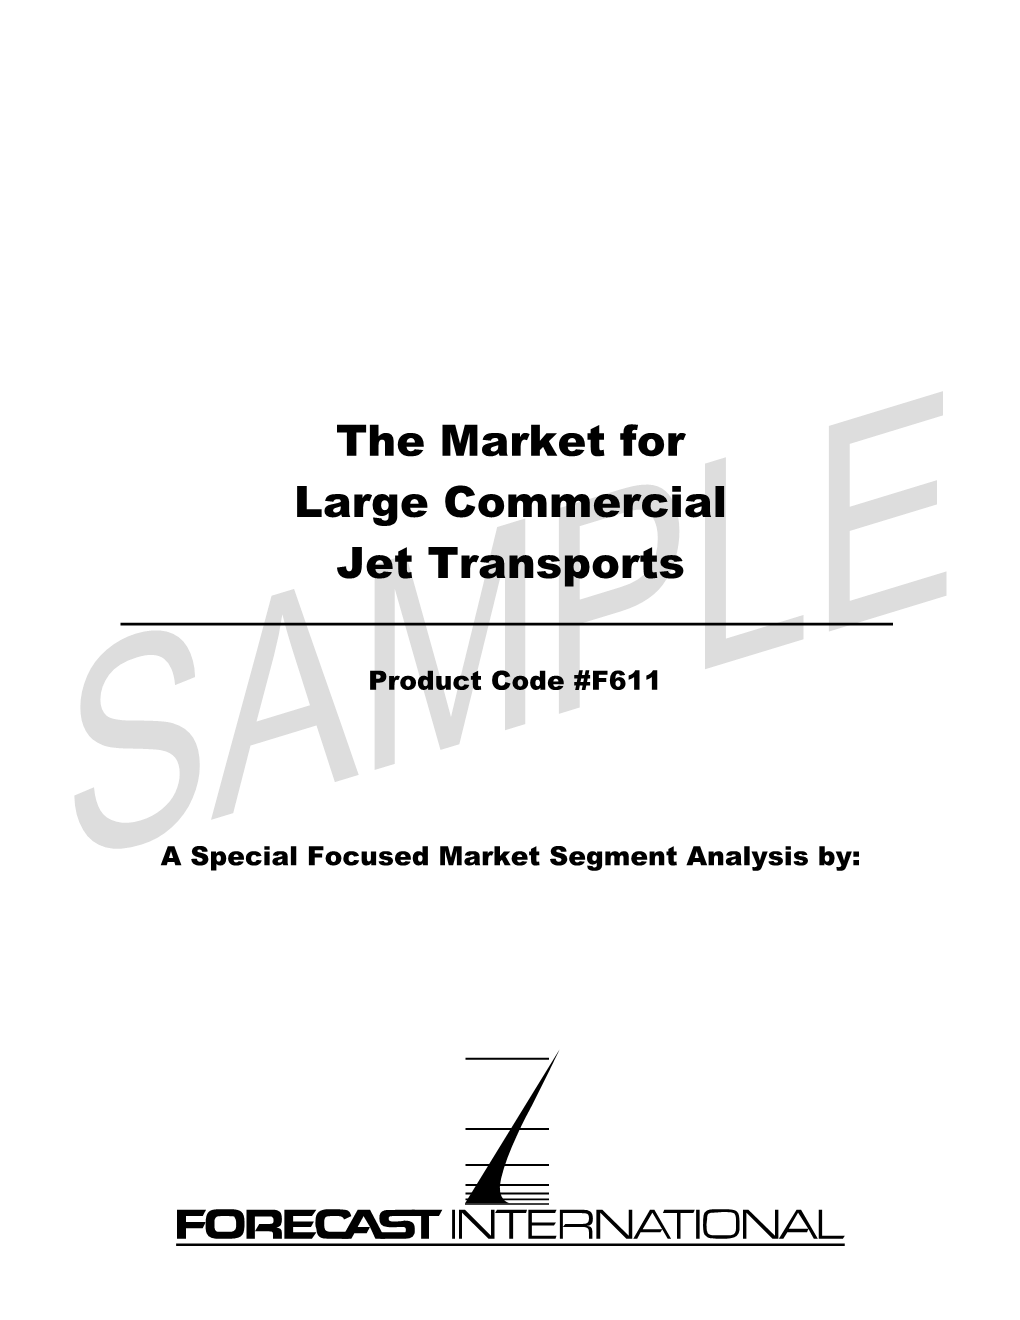 The Market for Large Commercial Jet Transports